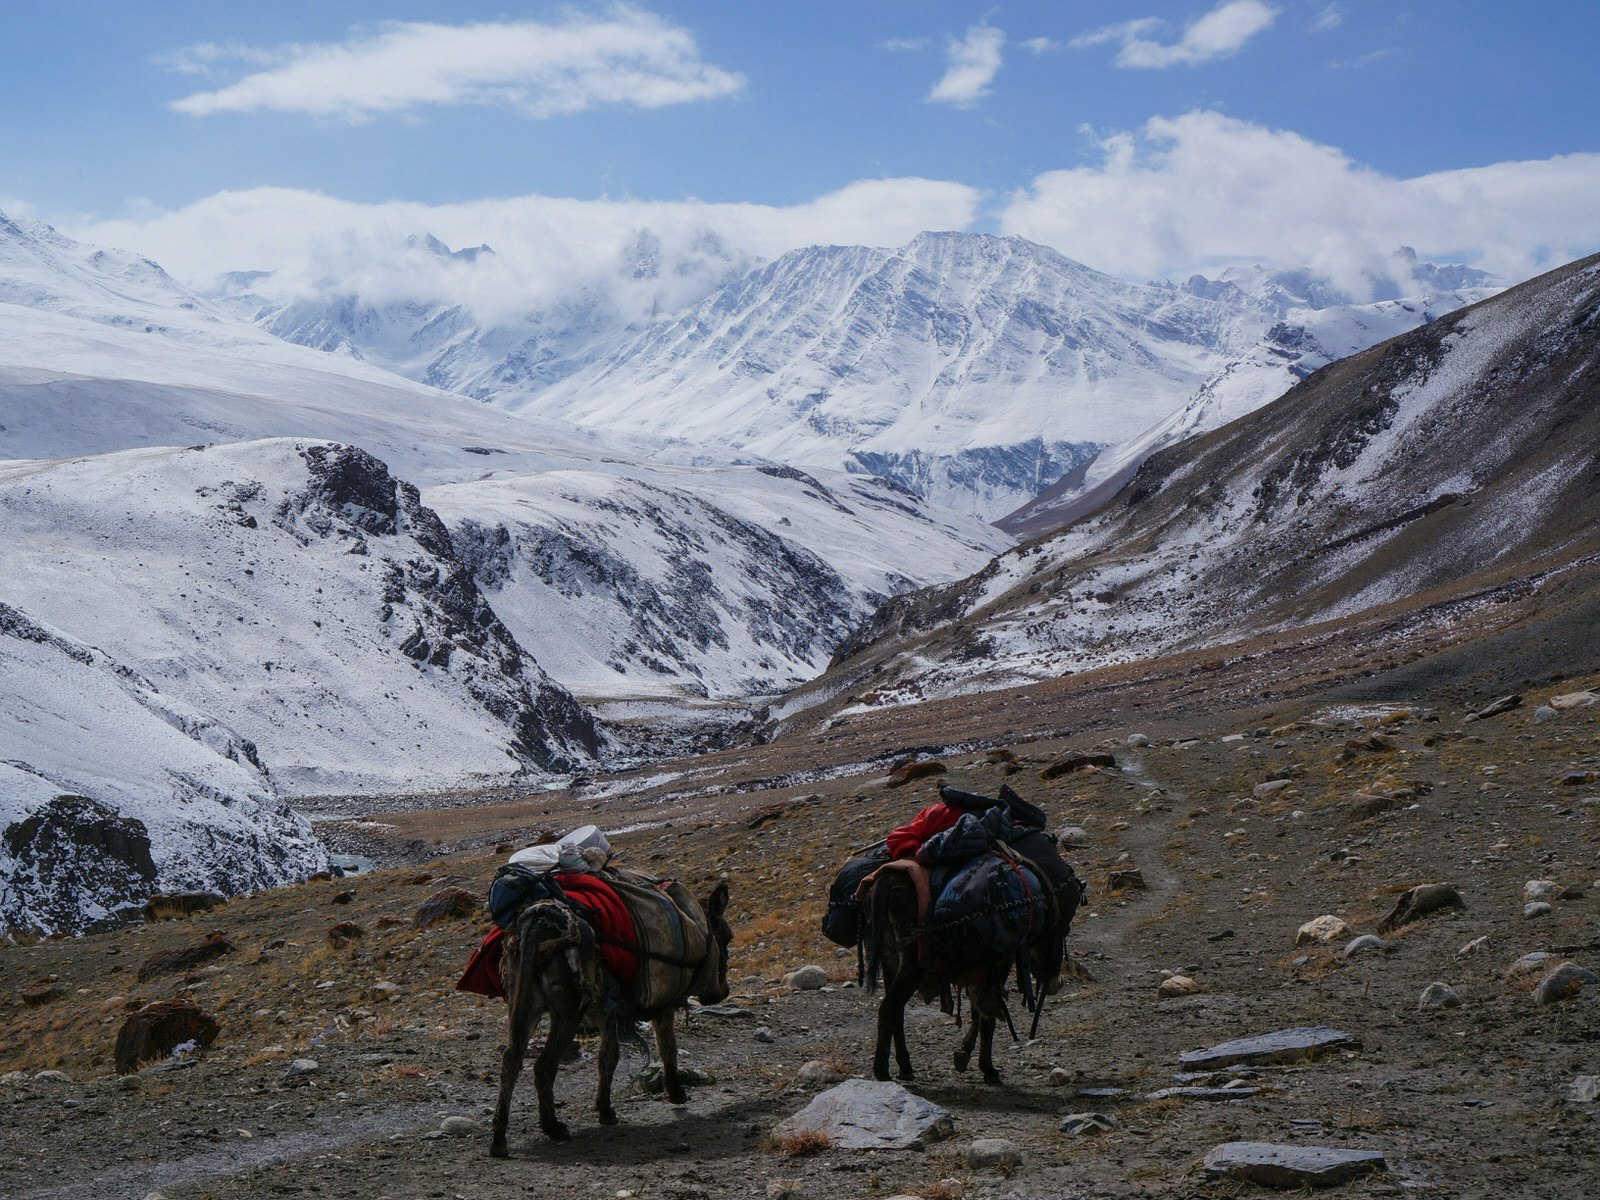 Two donkeys carrying gear in the foreground with snowy mountains in the background